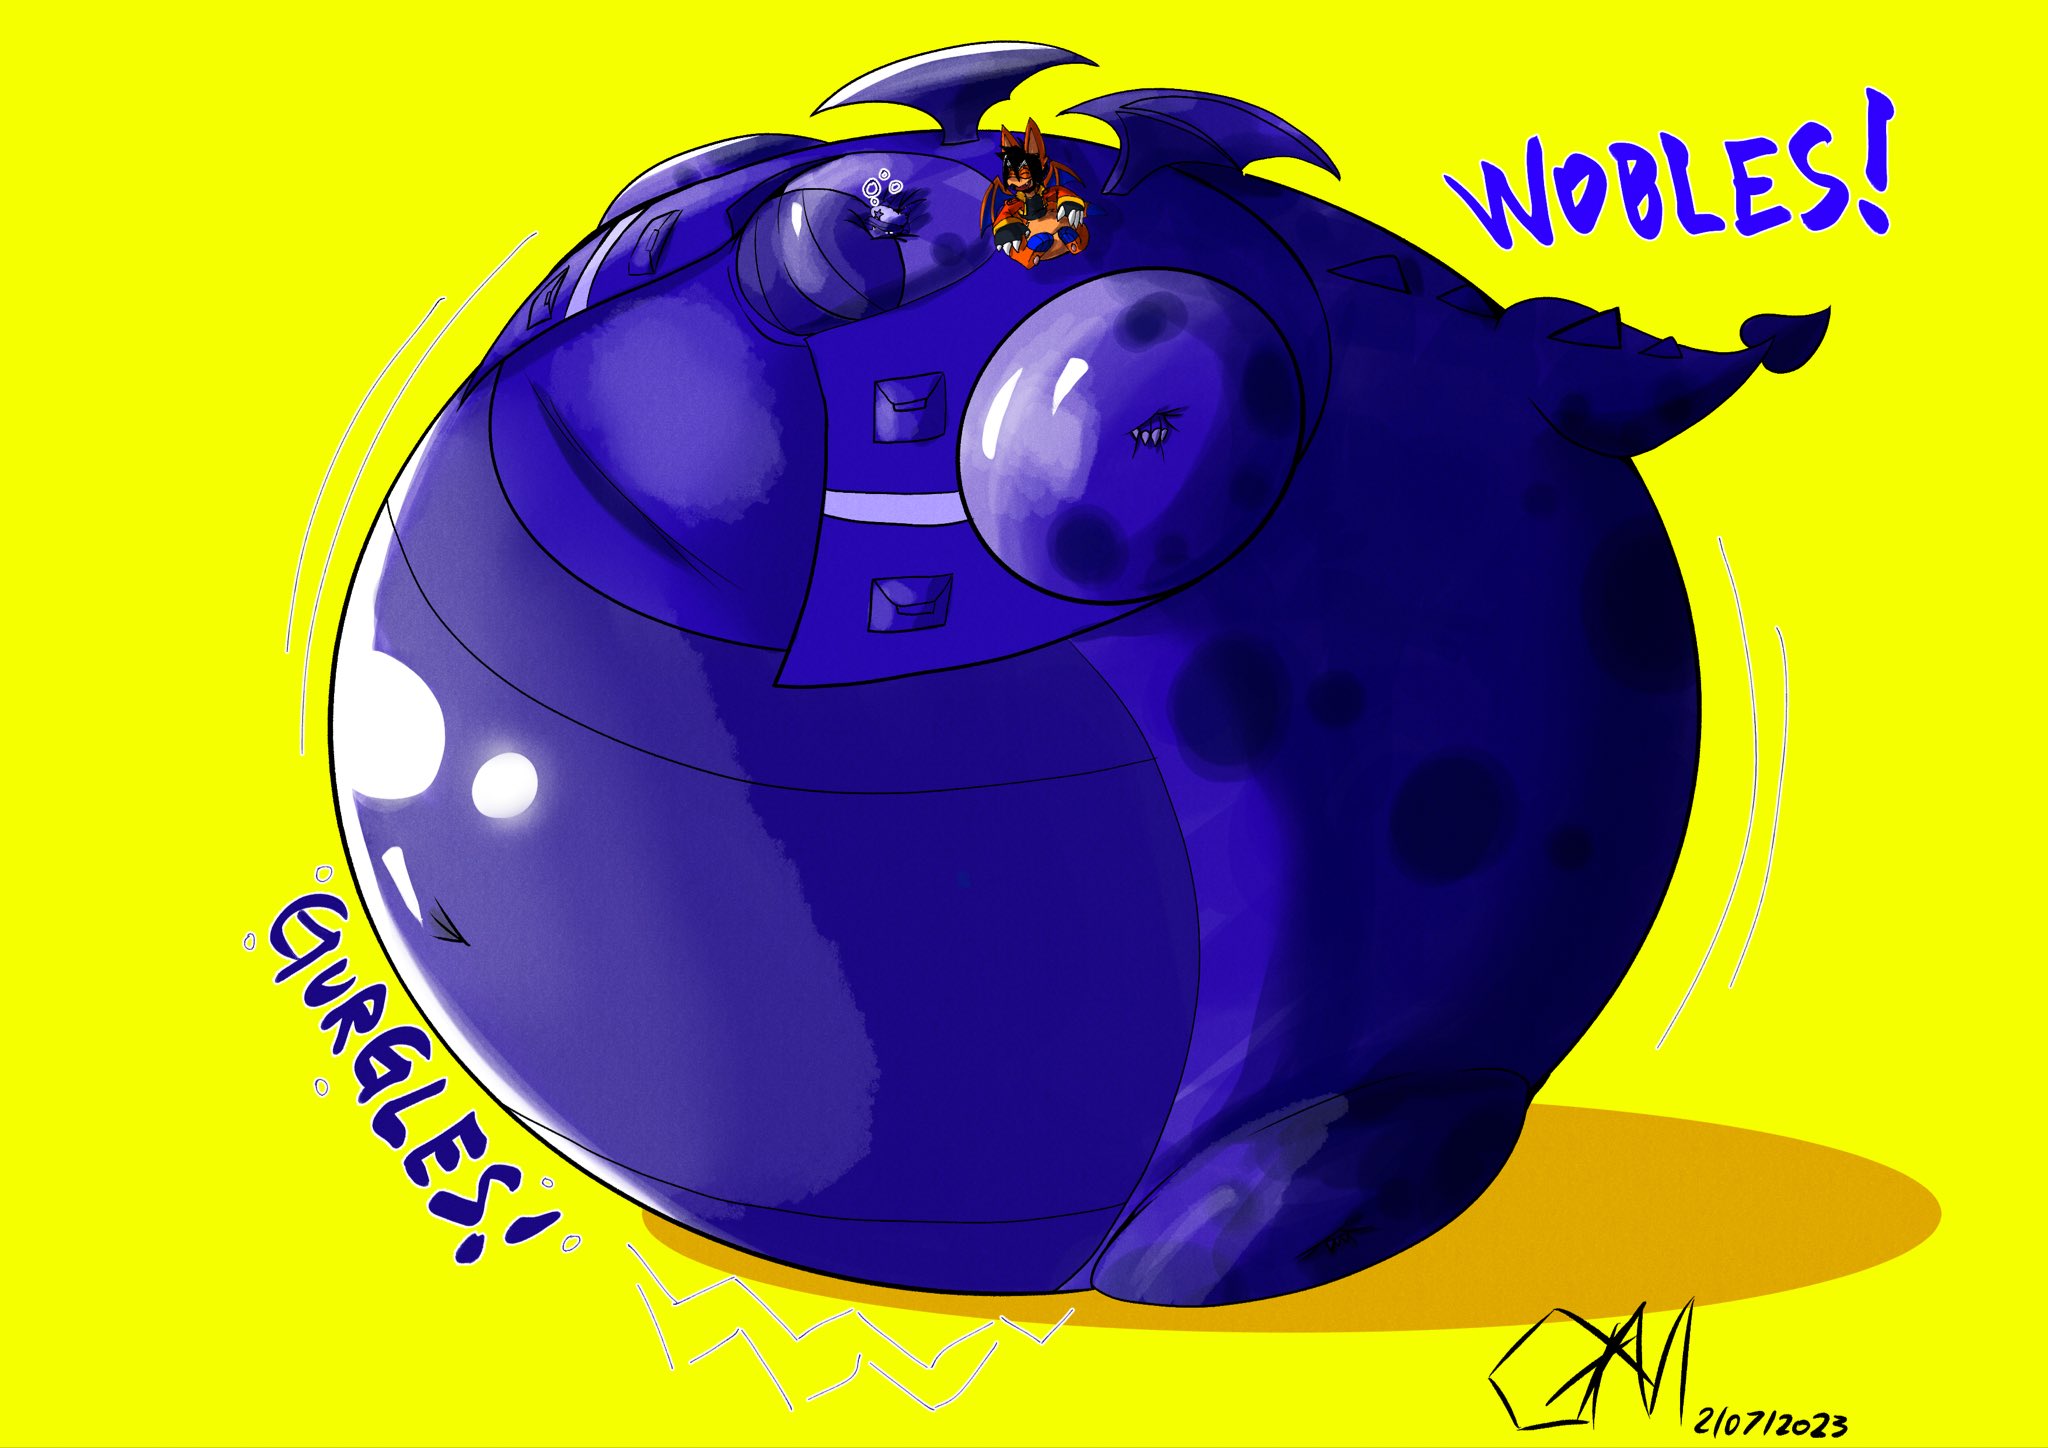 Blueberry inflation comics. Blueberry inflation.